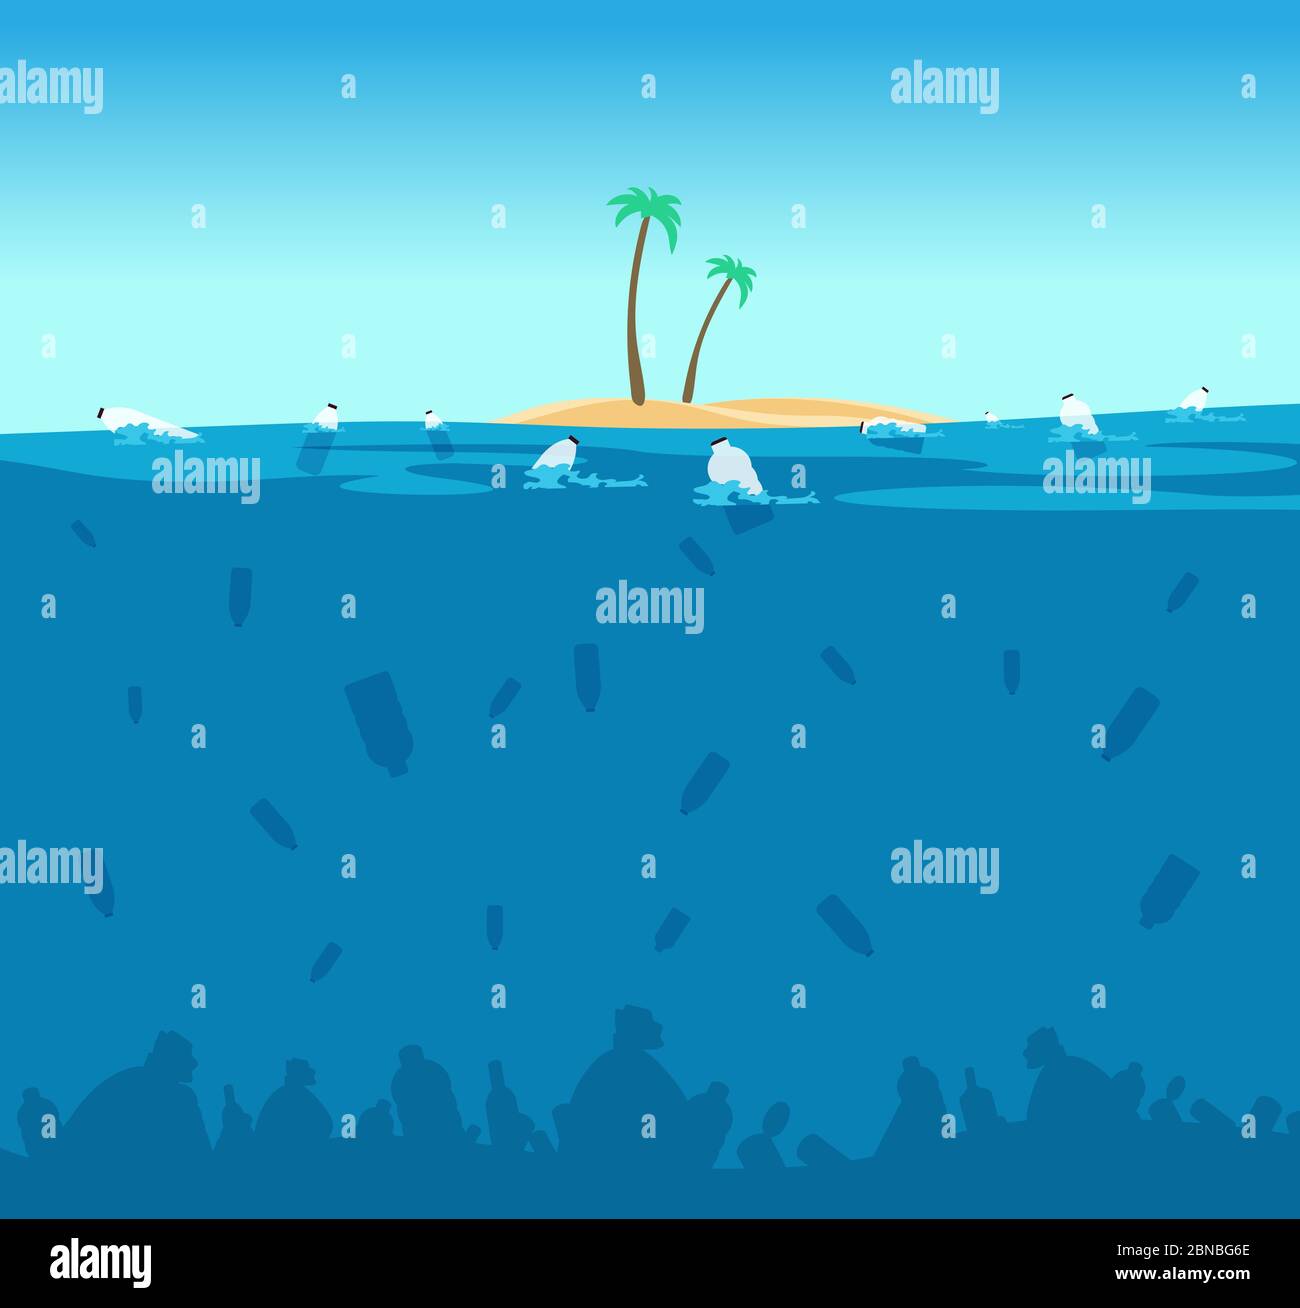 Plastic pollution of ocean. Bottles, plastic bags and debris on the seabed. Water environment protection eco vector concept. Illustration of ocean plastic pollution, island with green palm in sea Stock Vector